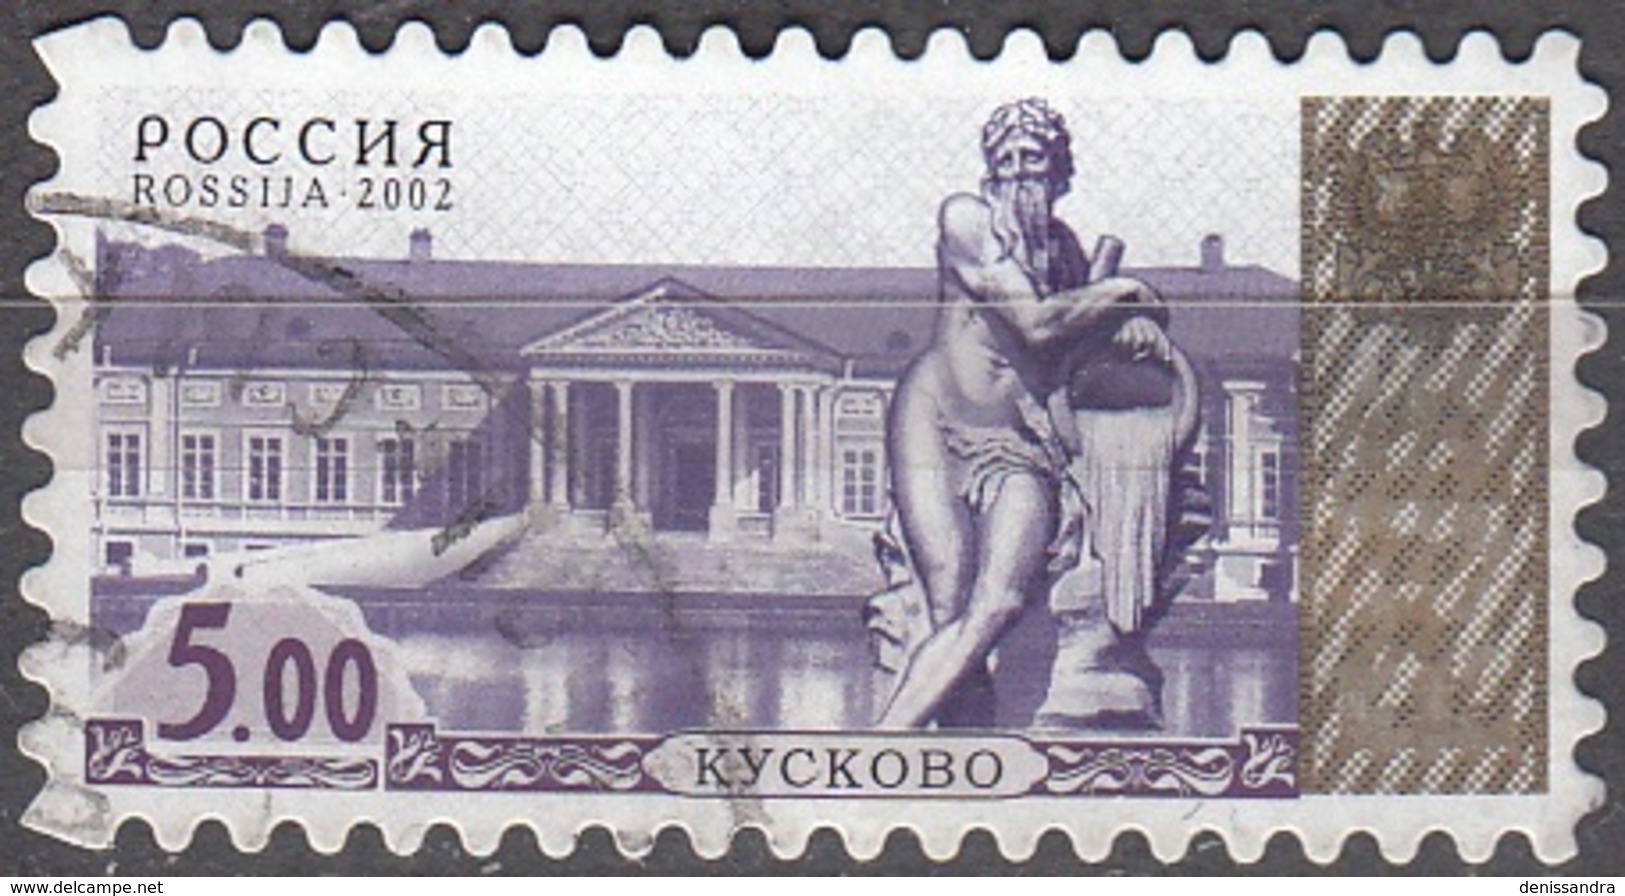 Rossija 2002 Michel 1049 O Cote (2008) 0.40 Euro Moscou Sculpture Cachet Rond - Used Stamps